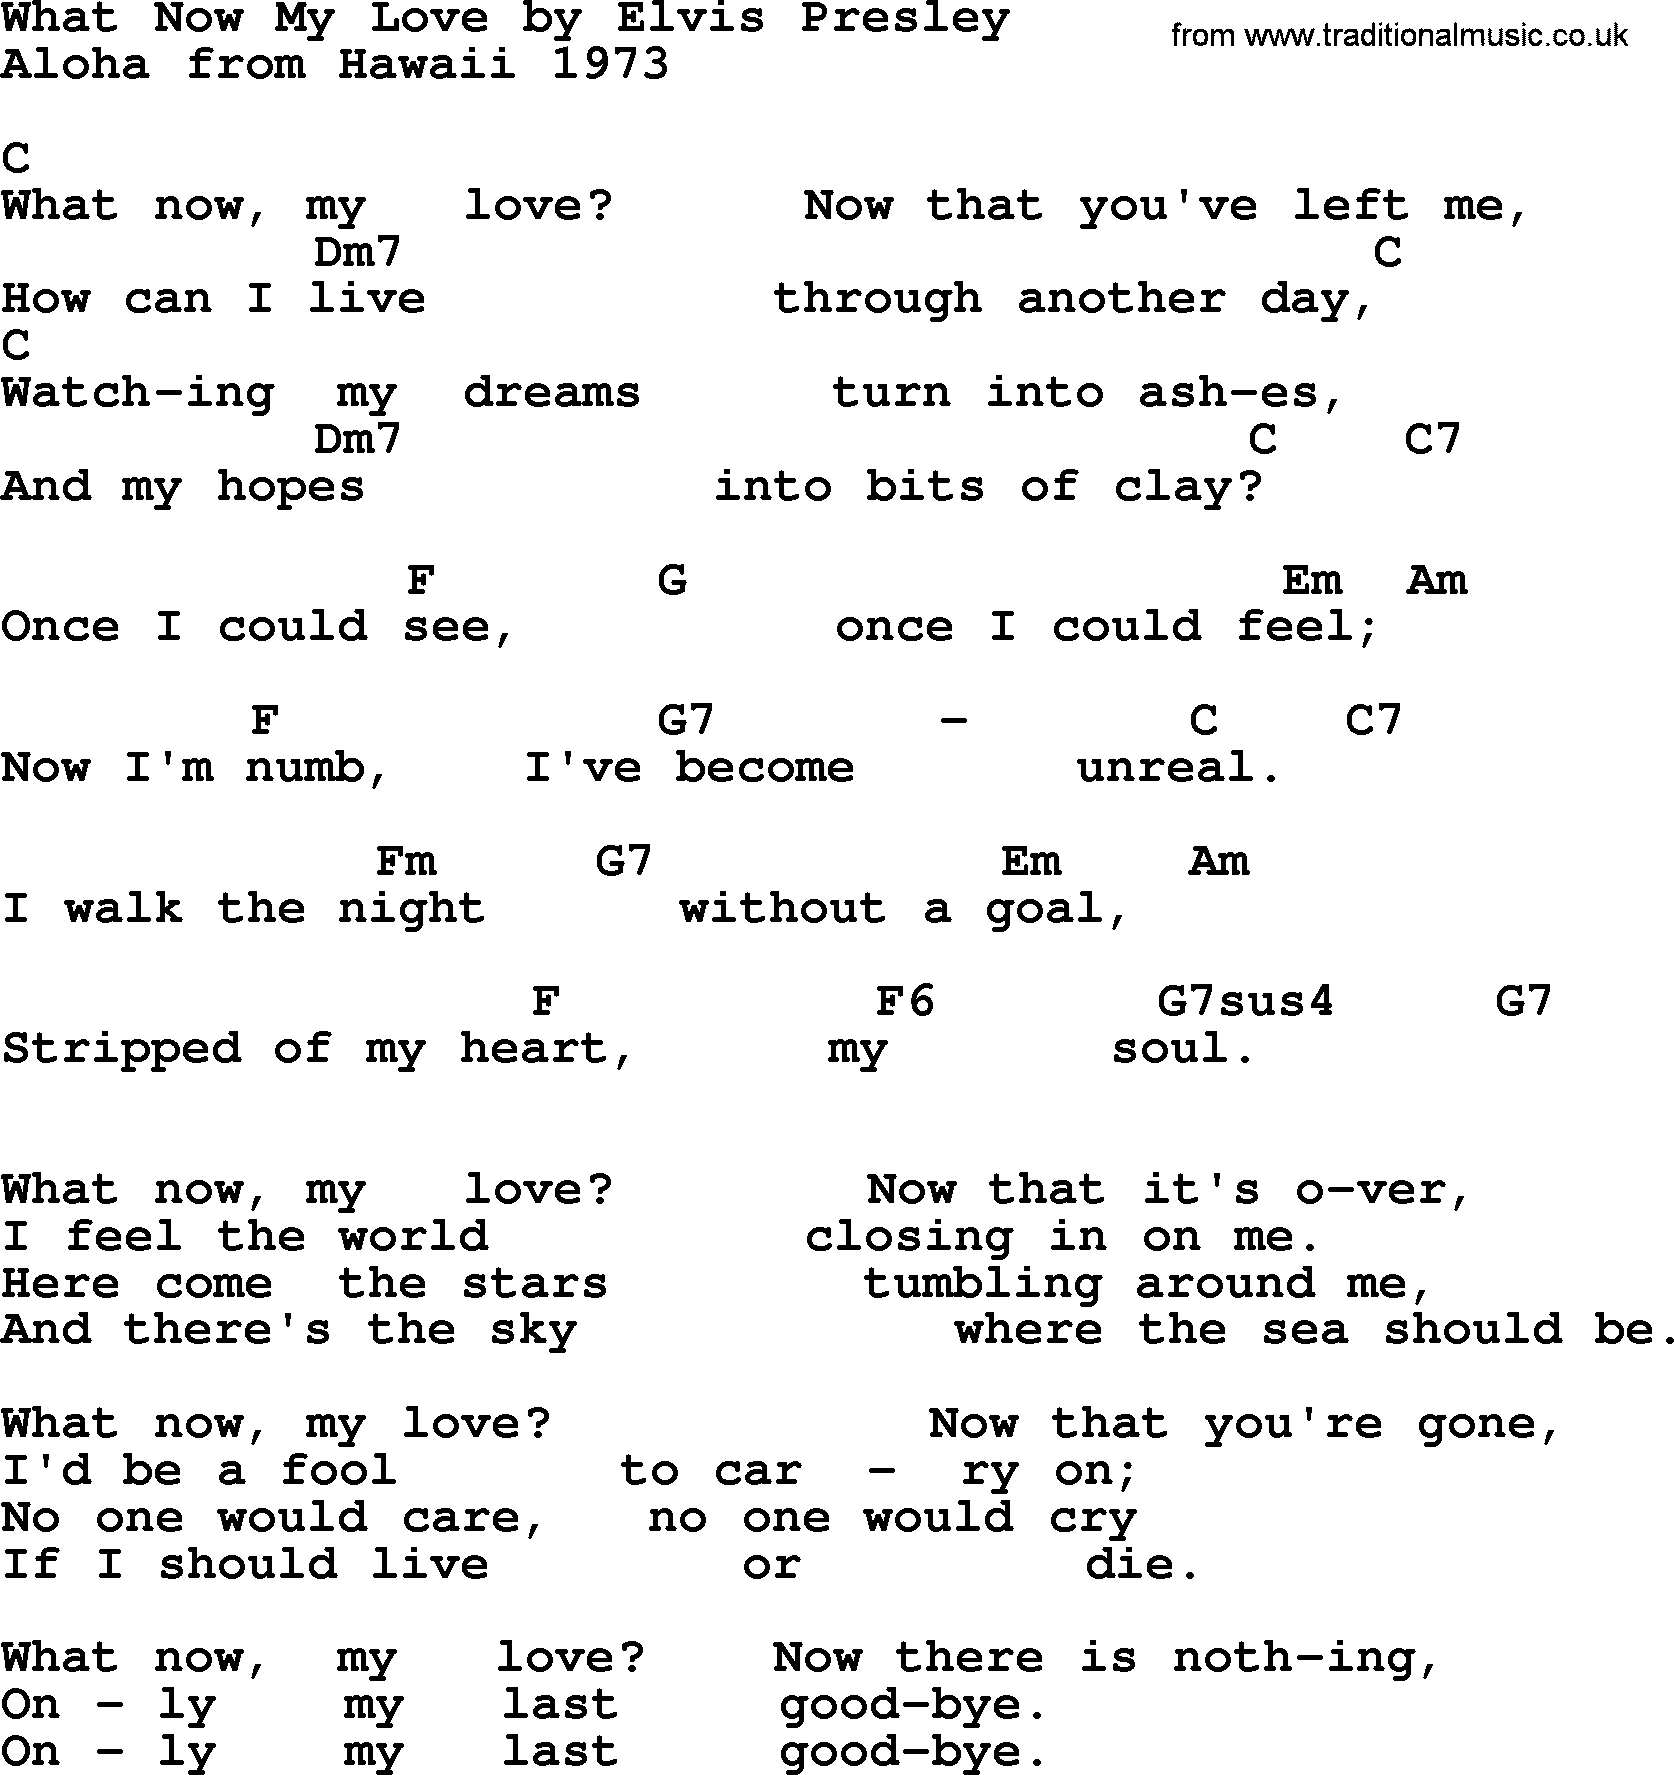 Elvis Presley song: What Now My Love, lyrics and chords